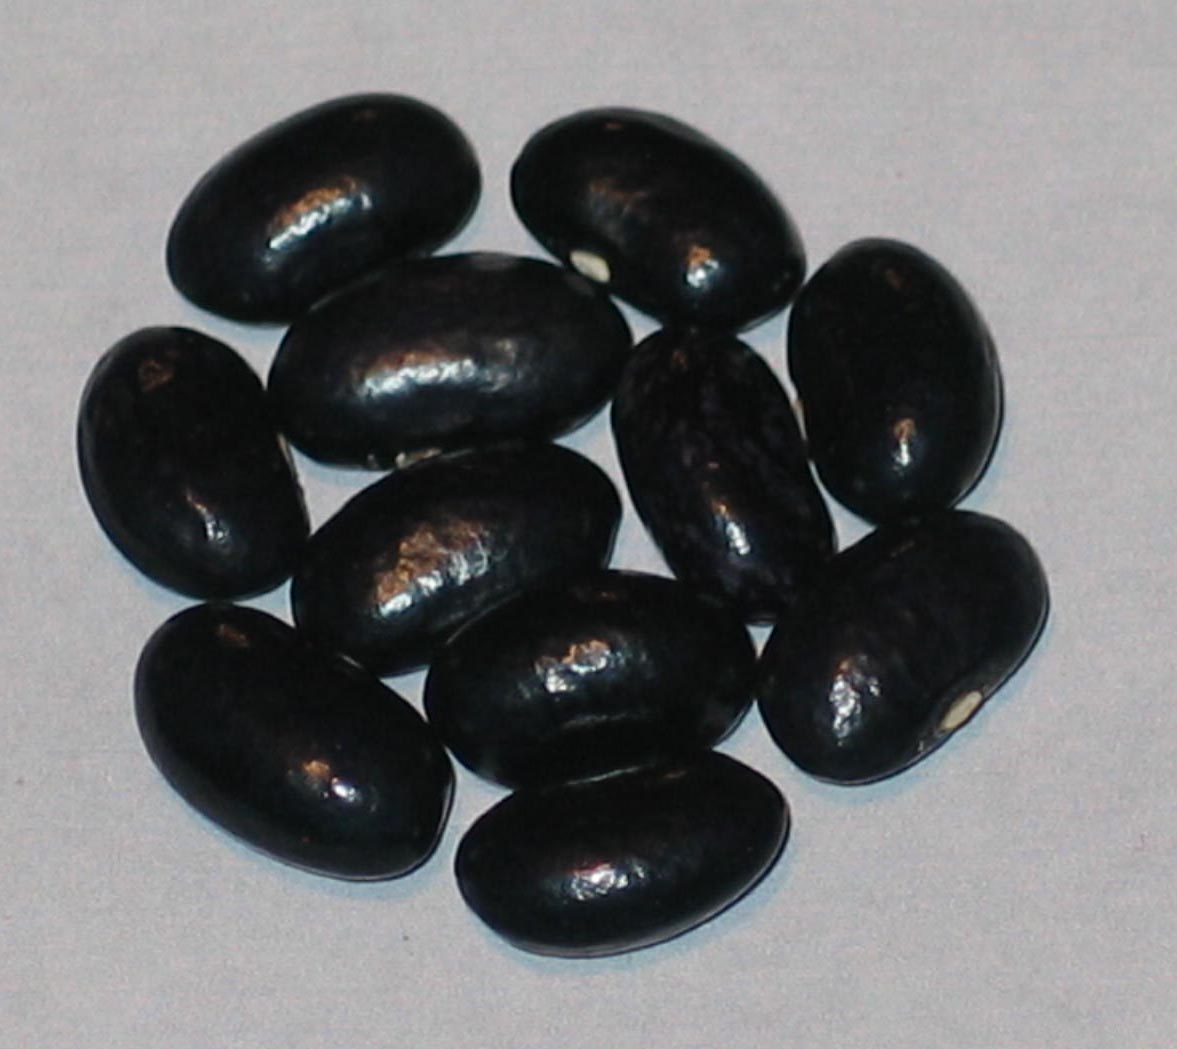 image of Super Marconi beans